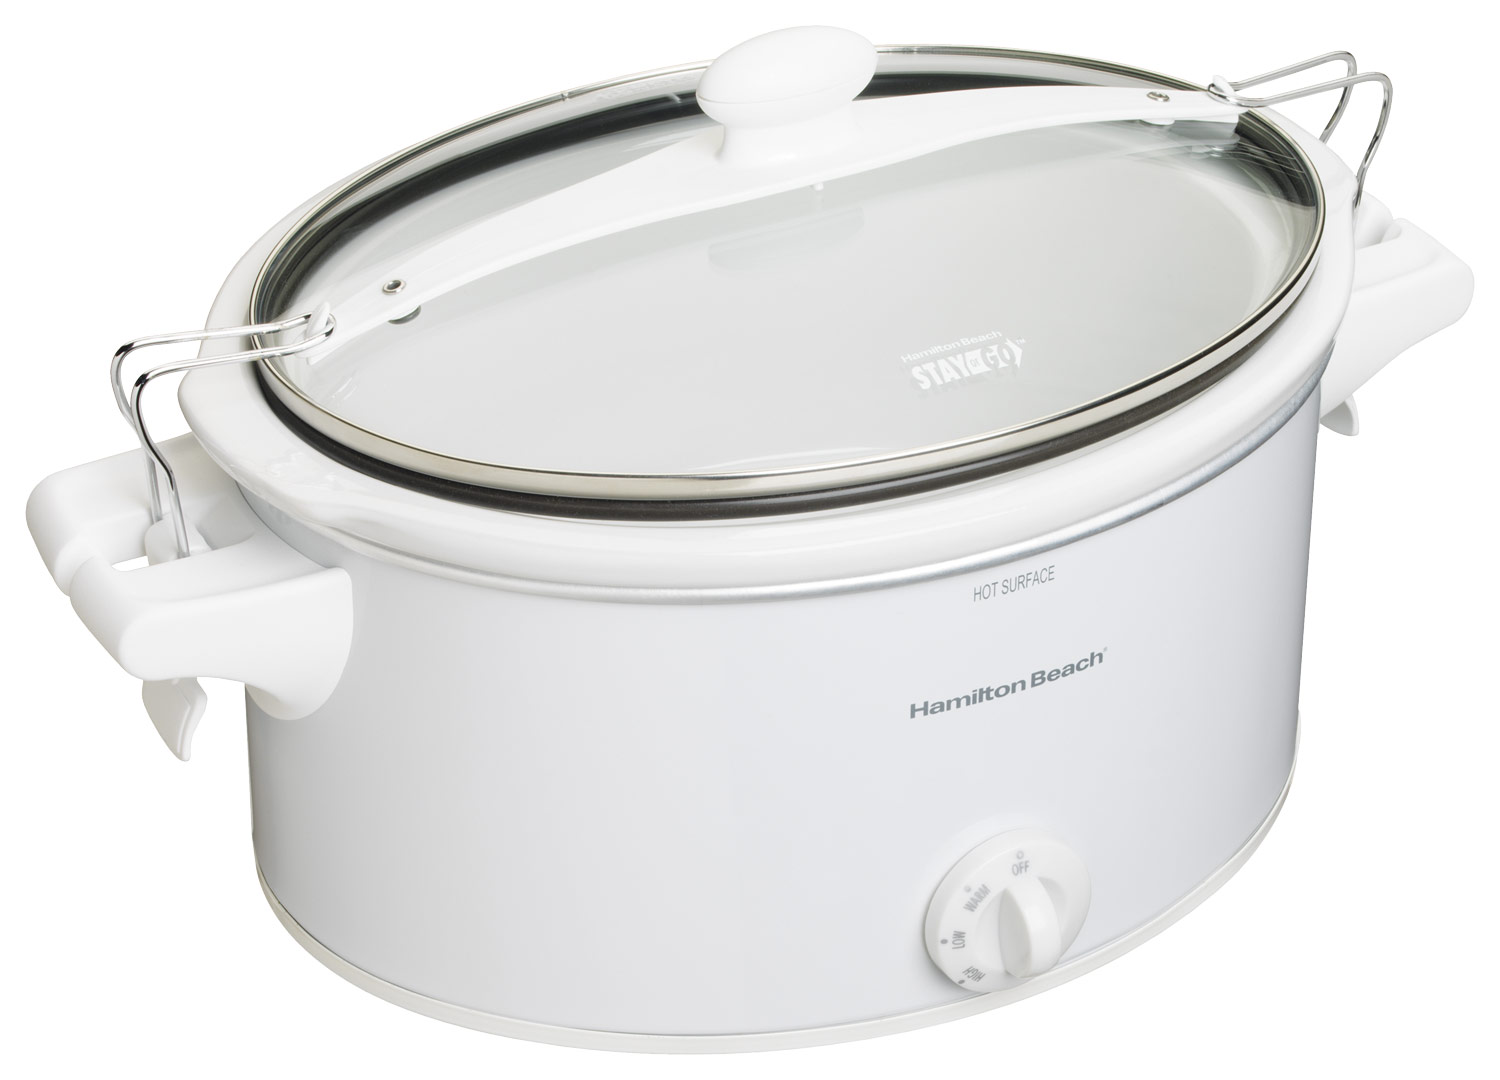 13 Incredible Hamilton Beach 6-Qt. Slow Cooker For 2023